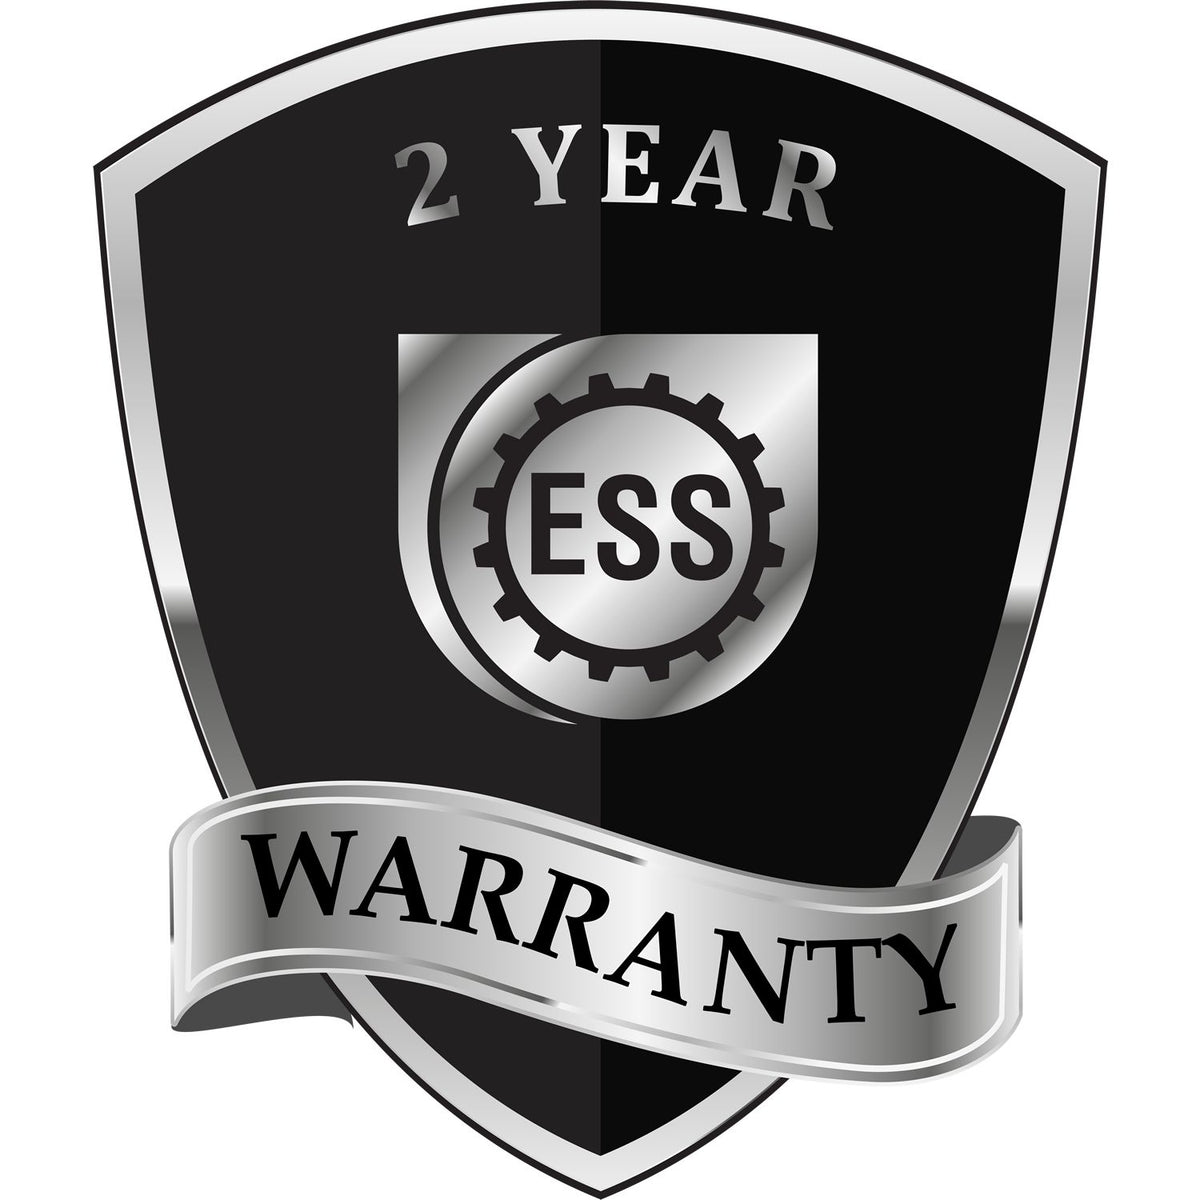 A black and silver badge or emblem showing warranty information for the Gift Oklahoma Landscape Architect Seal